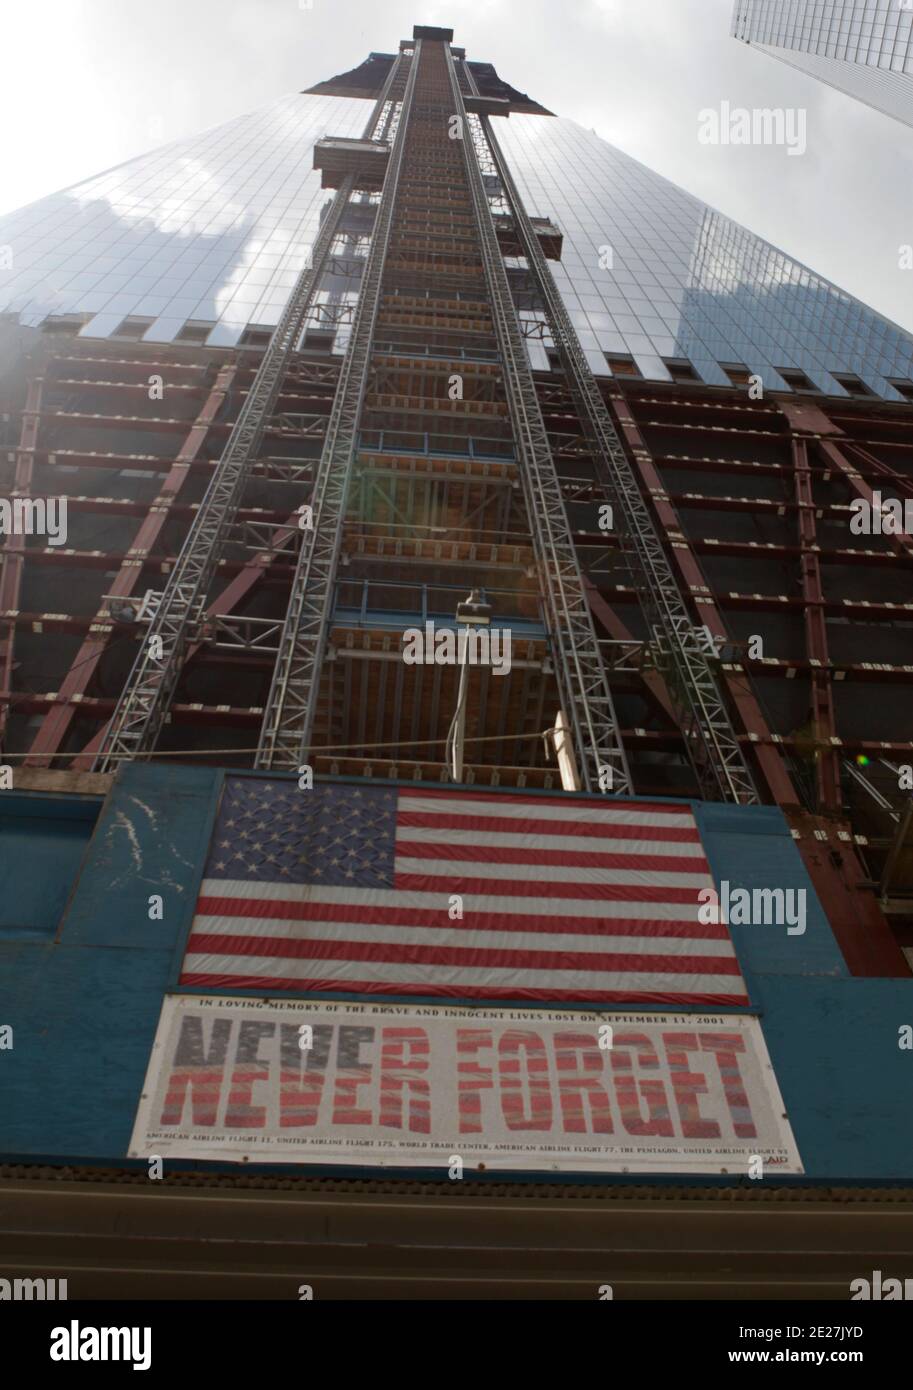 The 9/11 Memorial Pools are tested with water by construction workers  during the New York Foreign Press International journalists' visit to  Ground Zero, New York City, NY, USA on August 4, 2011.